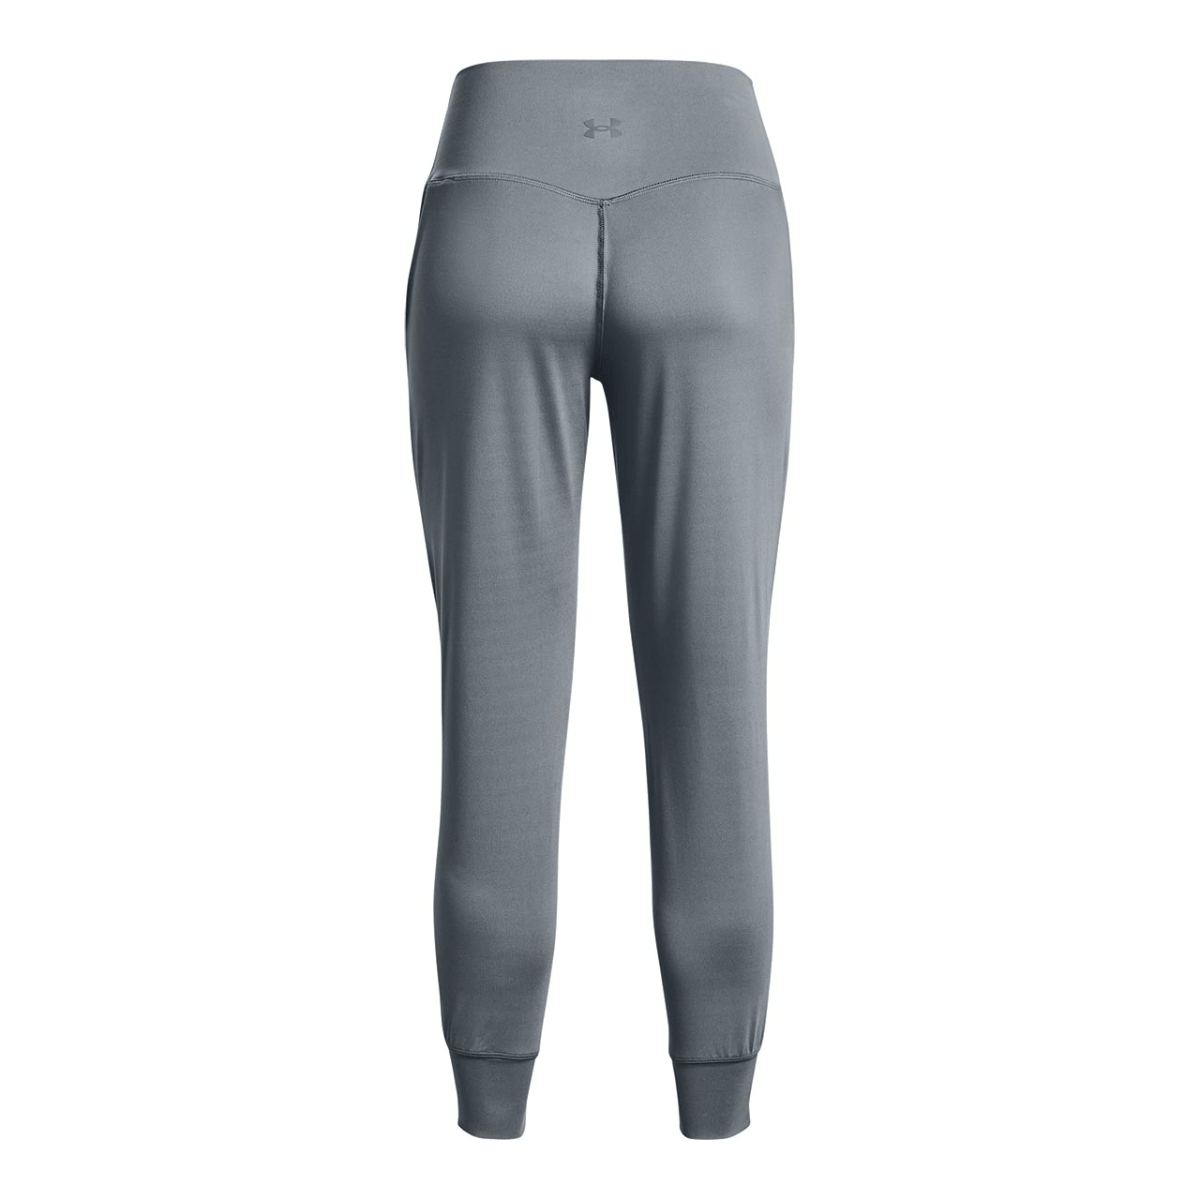 Under Armour Meridian Joggers Review